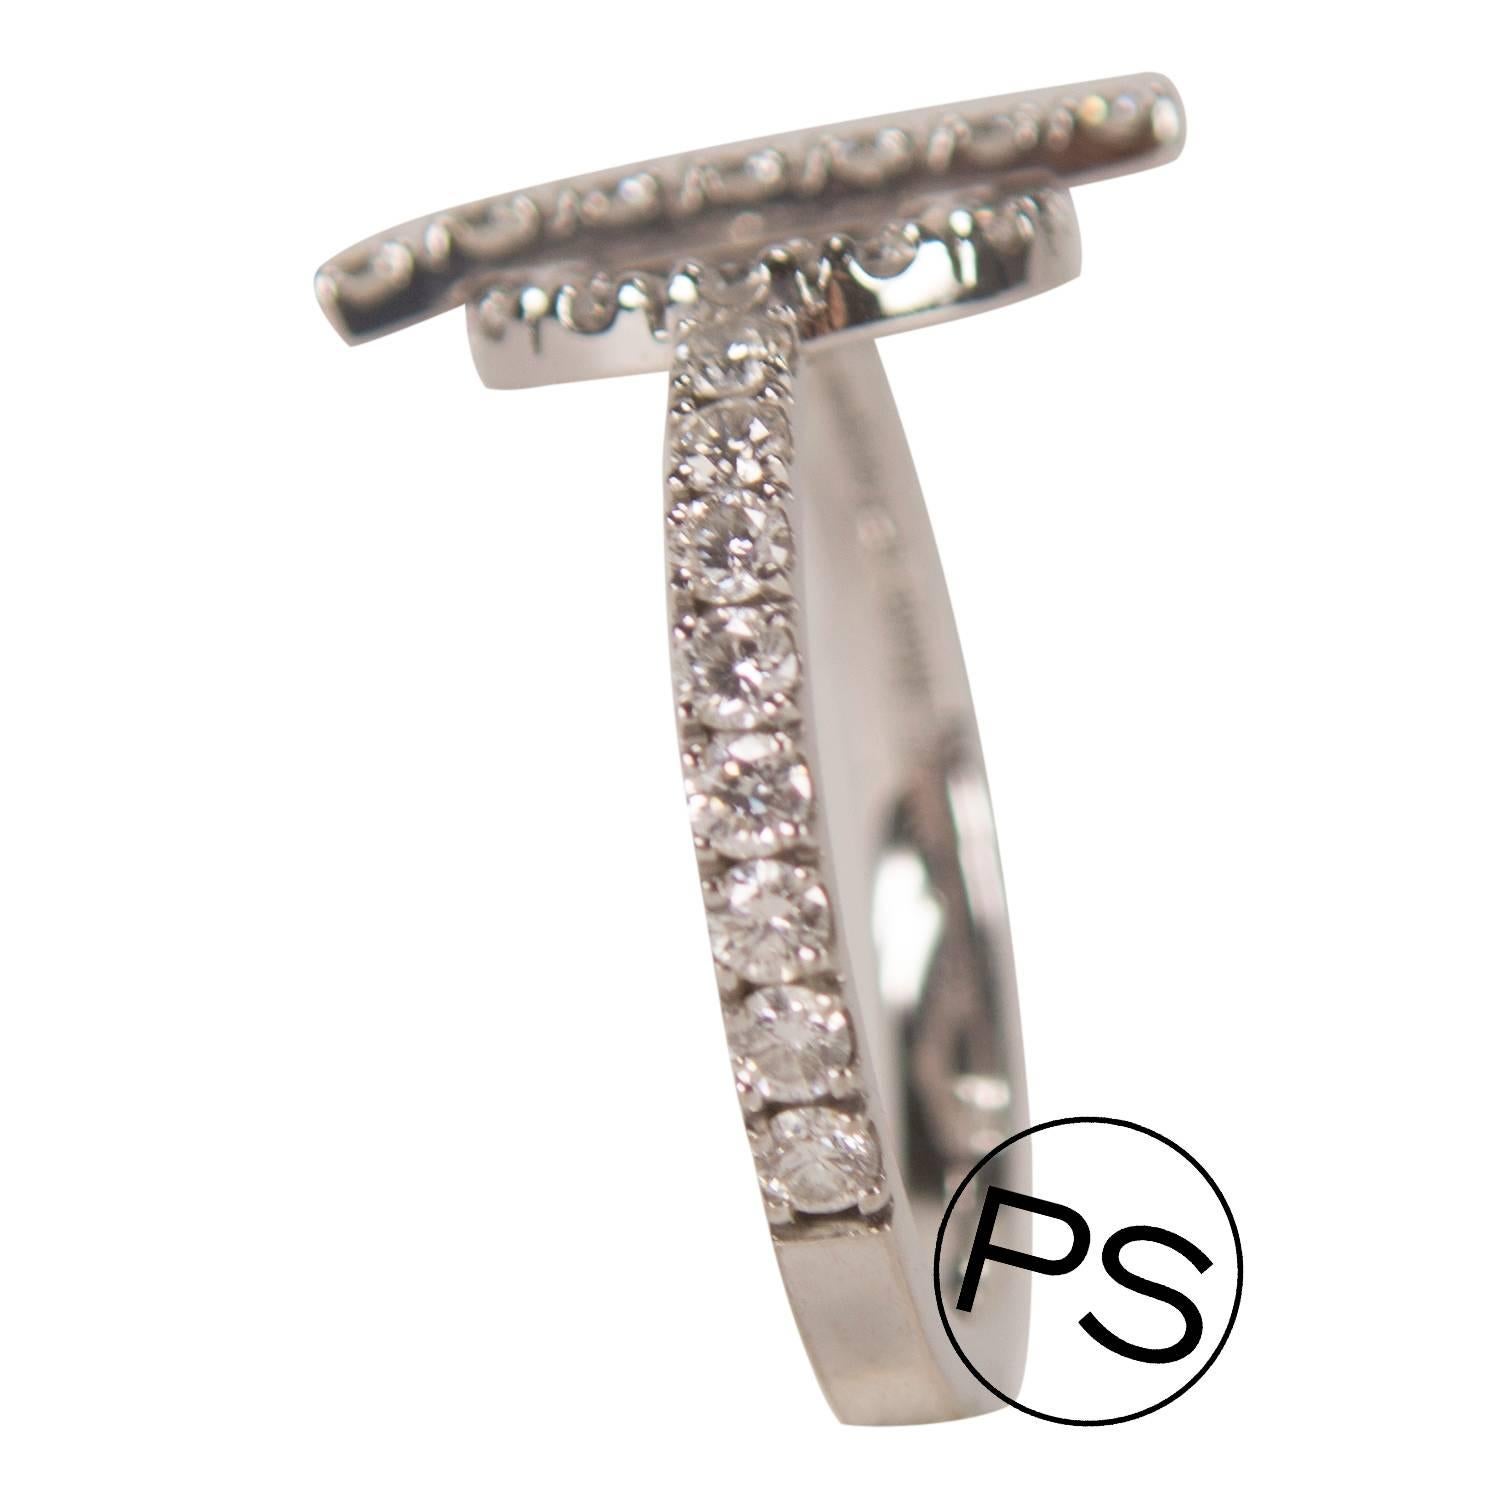 Hermes Ring Finesse 18K White Gold 2014.

Pre-owned and used.

Bought it in Hermes store in 2014.

Size;53.

Color; Colorless

Metal:18K White Gold
Weight: 4 grams
Stones: Diamond

-Shipment and Insurance, 100% Safe.
- You can order